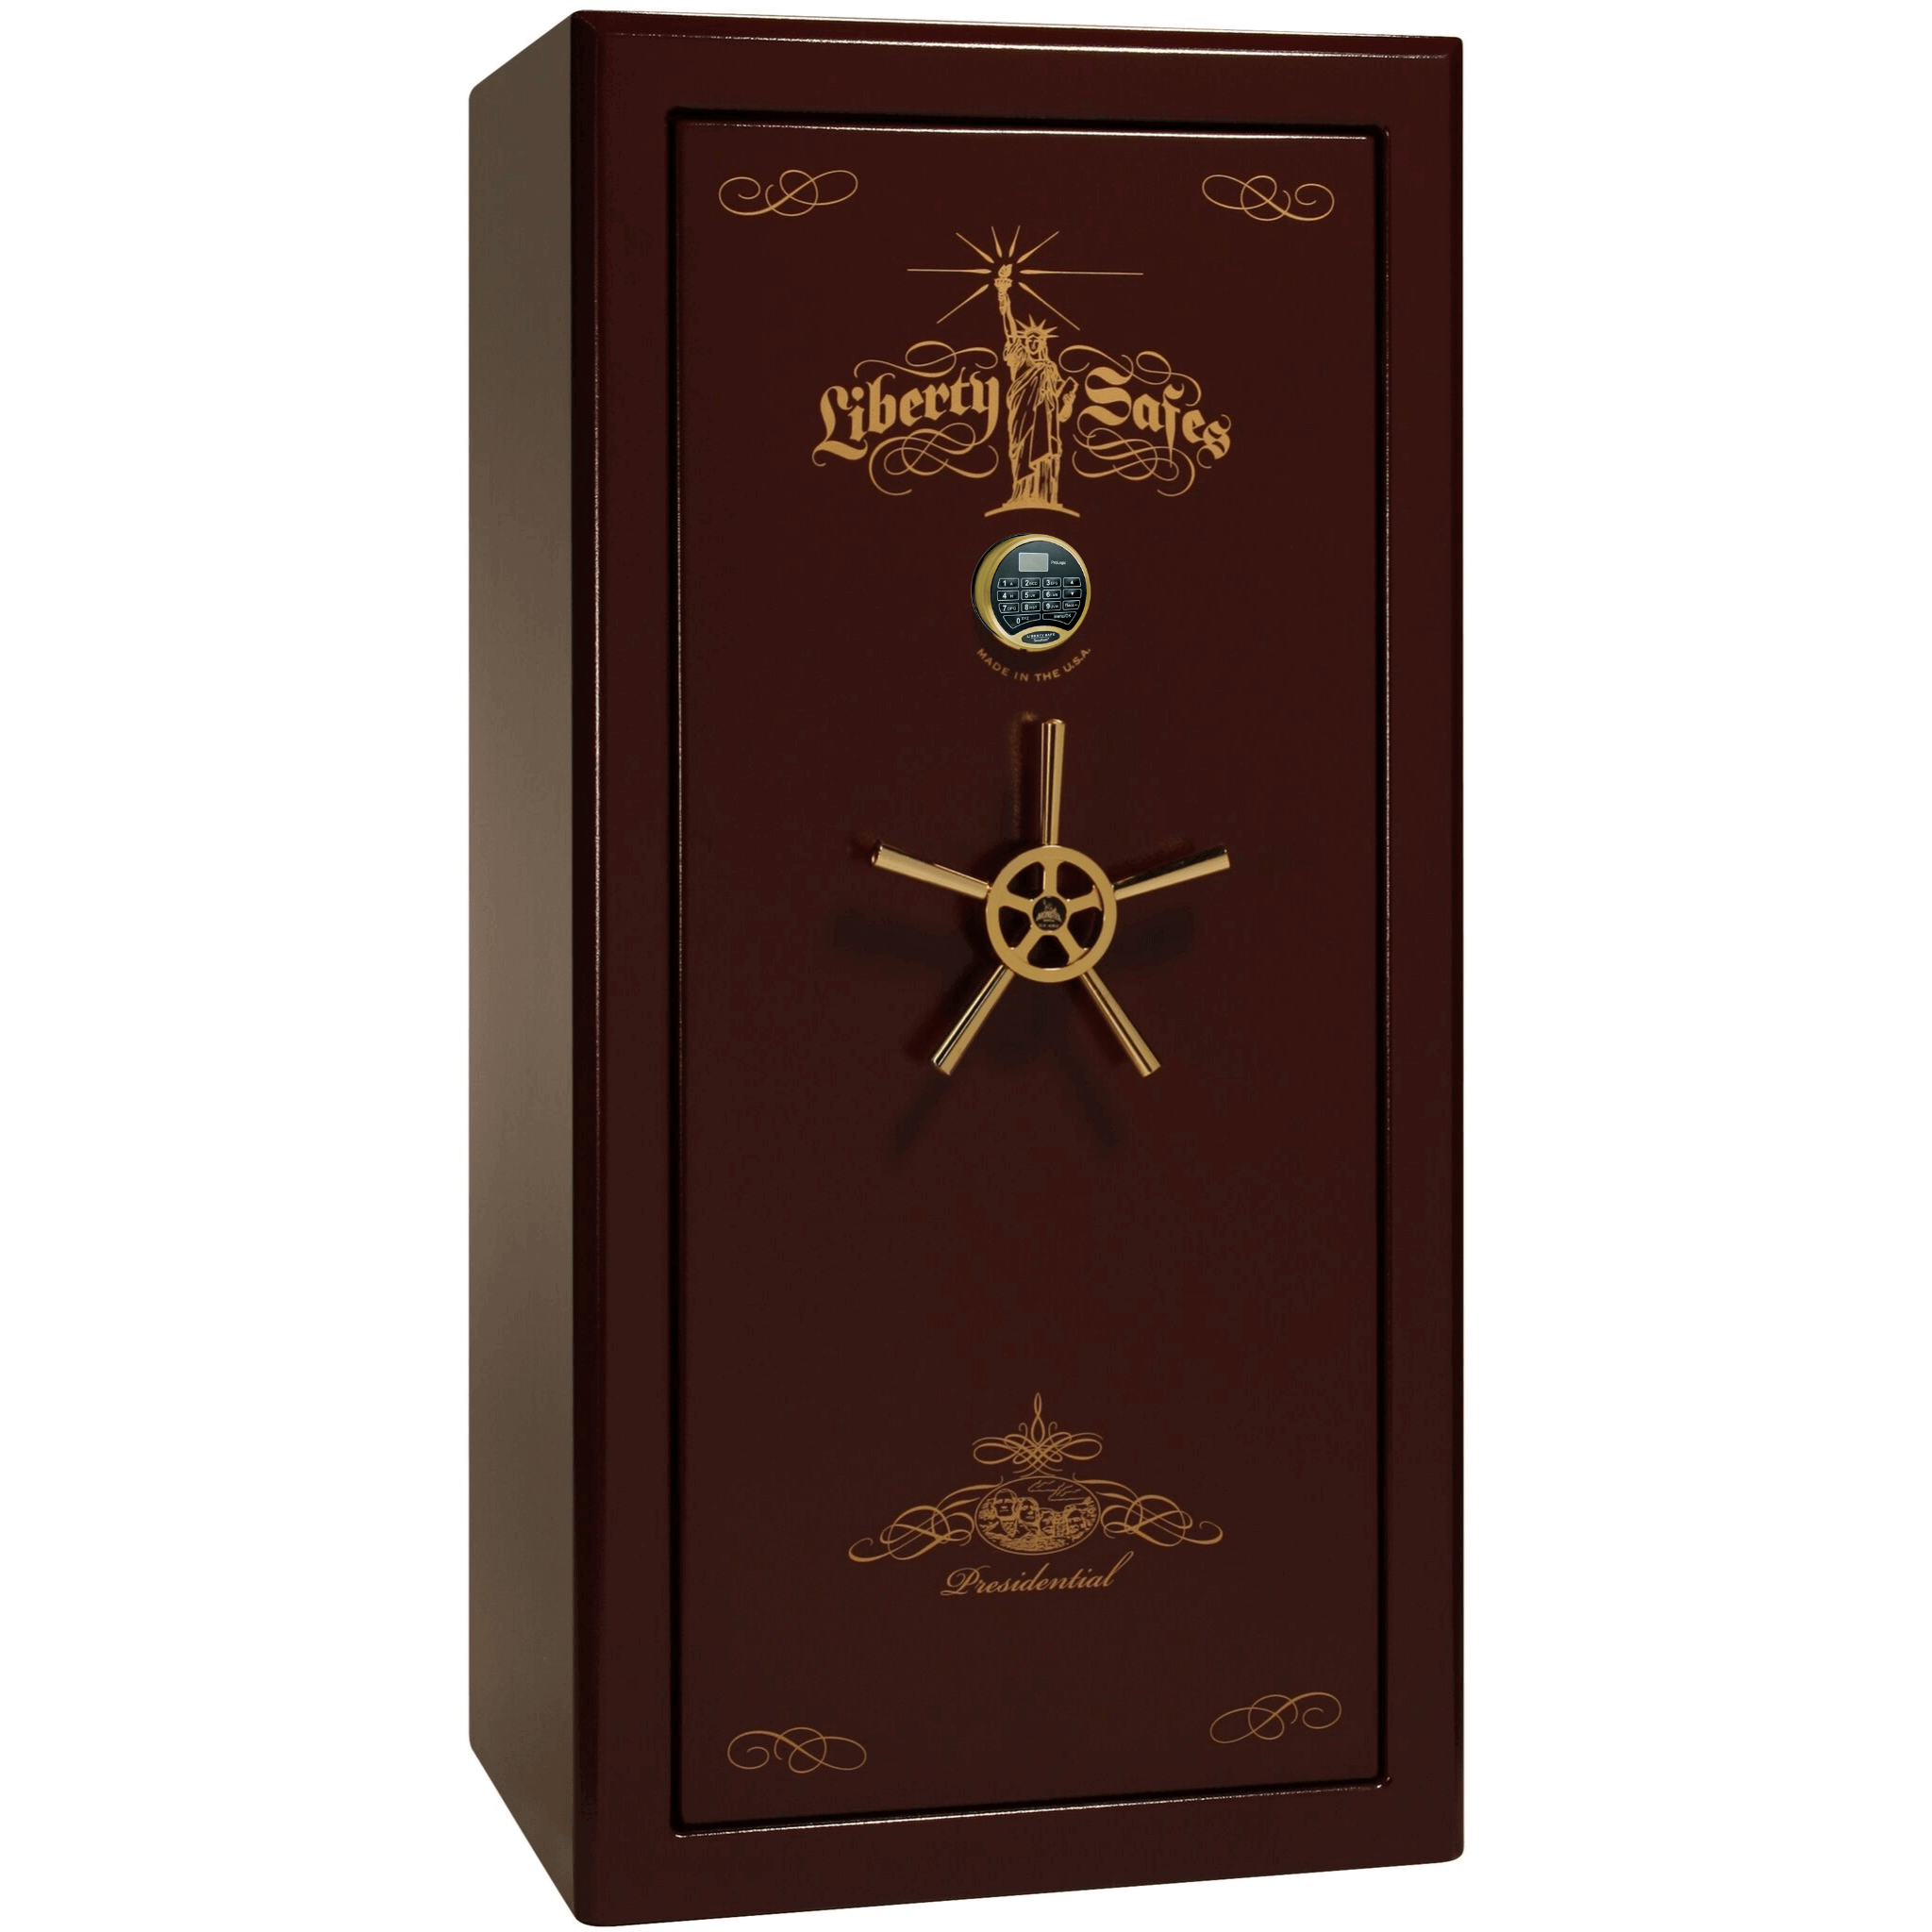 Liberty Presidential 25 electronics safe for storing electronics and digital devices